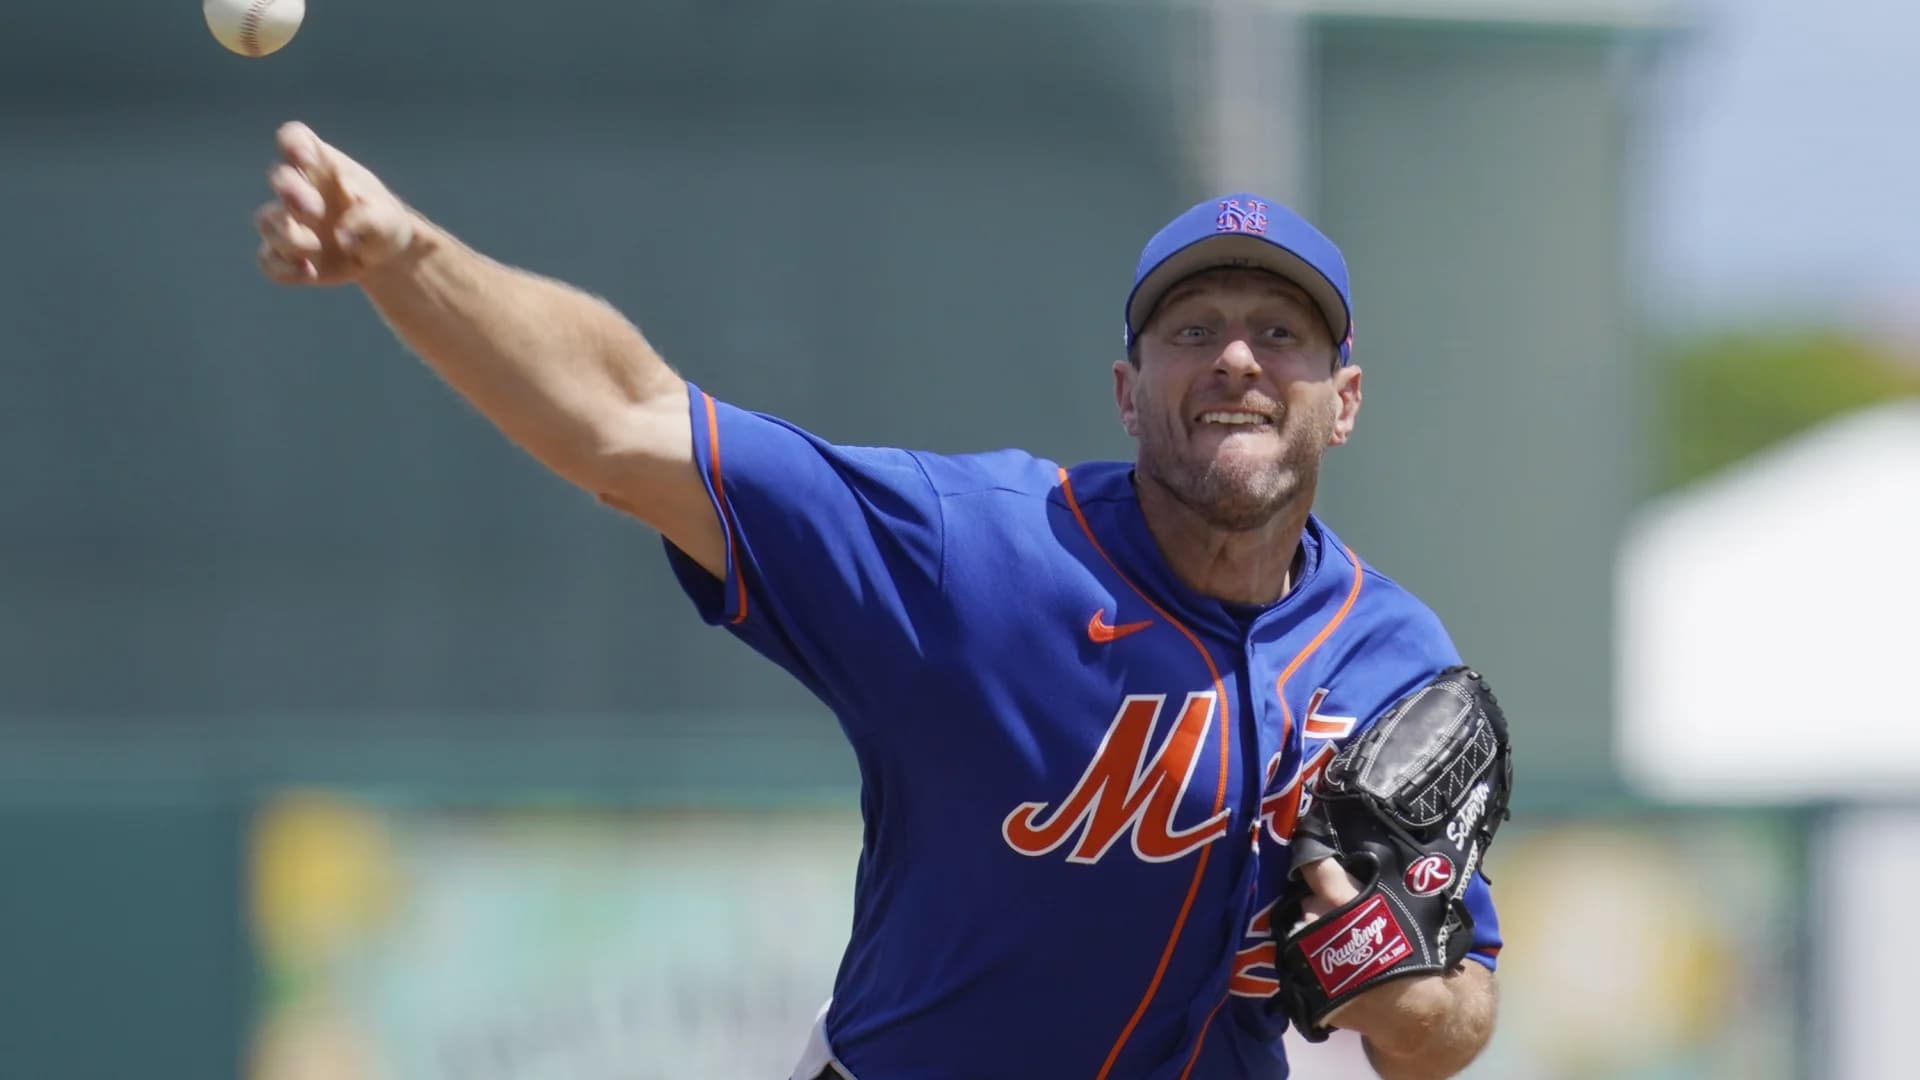 Mets' Max Scherzer says hamstring is OK, aims to pitch Friday in DC